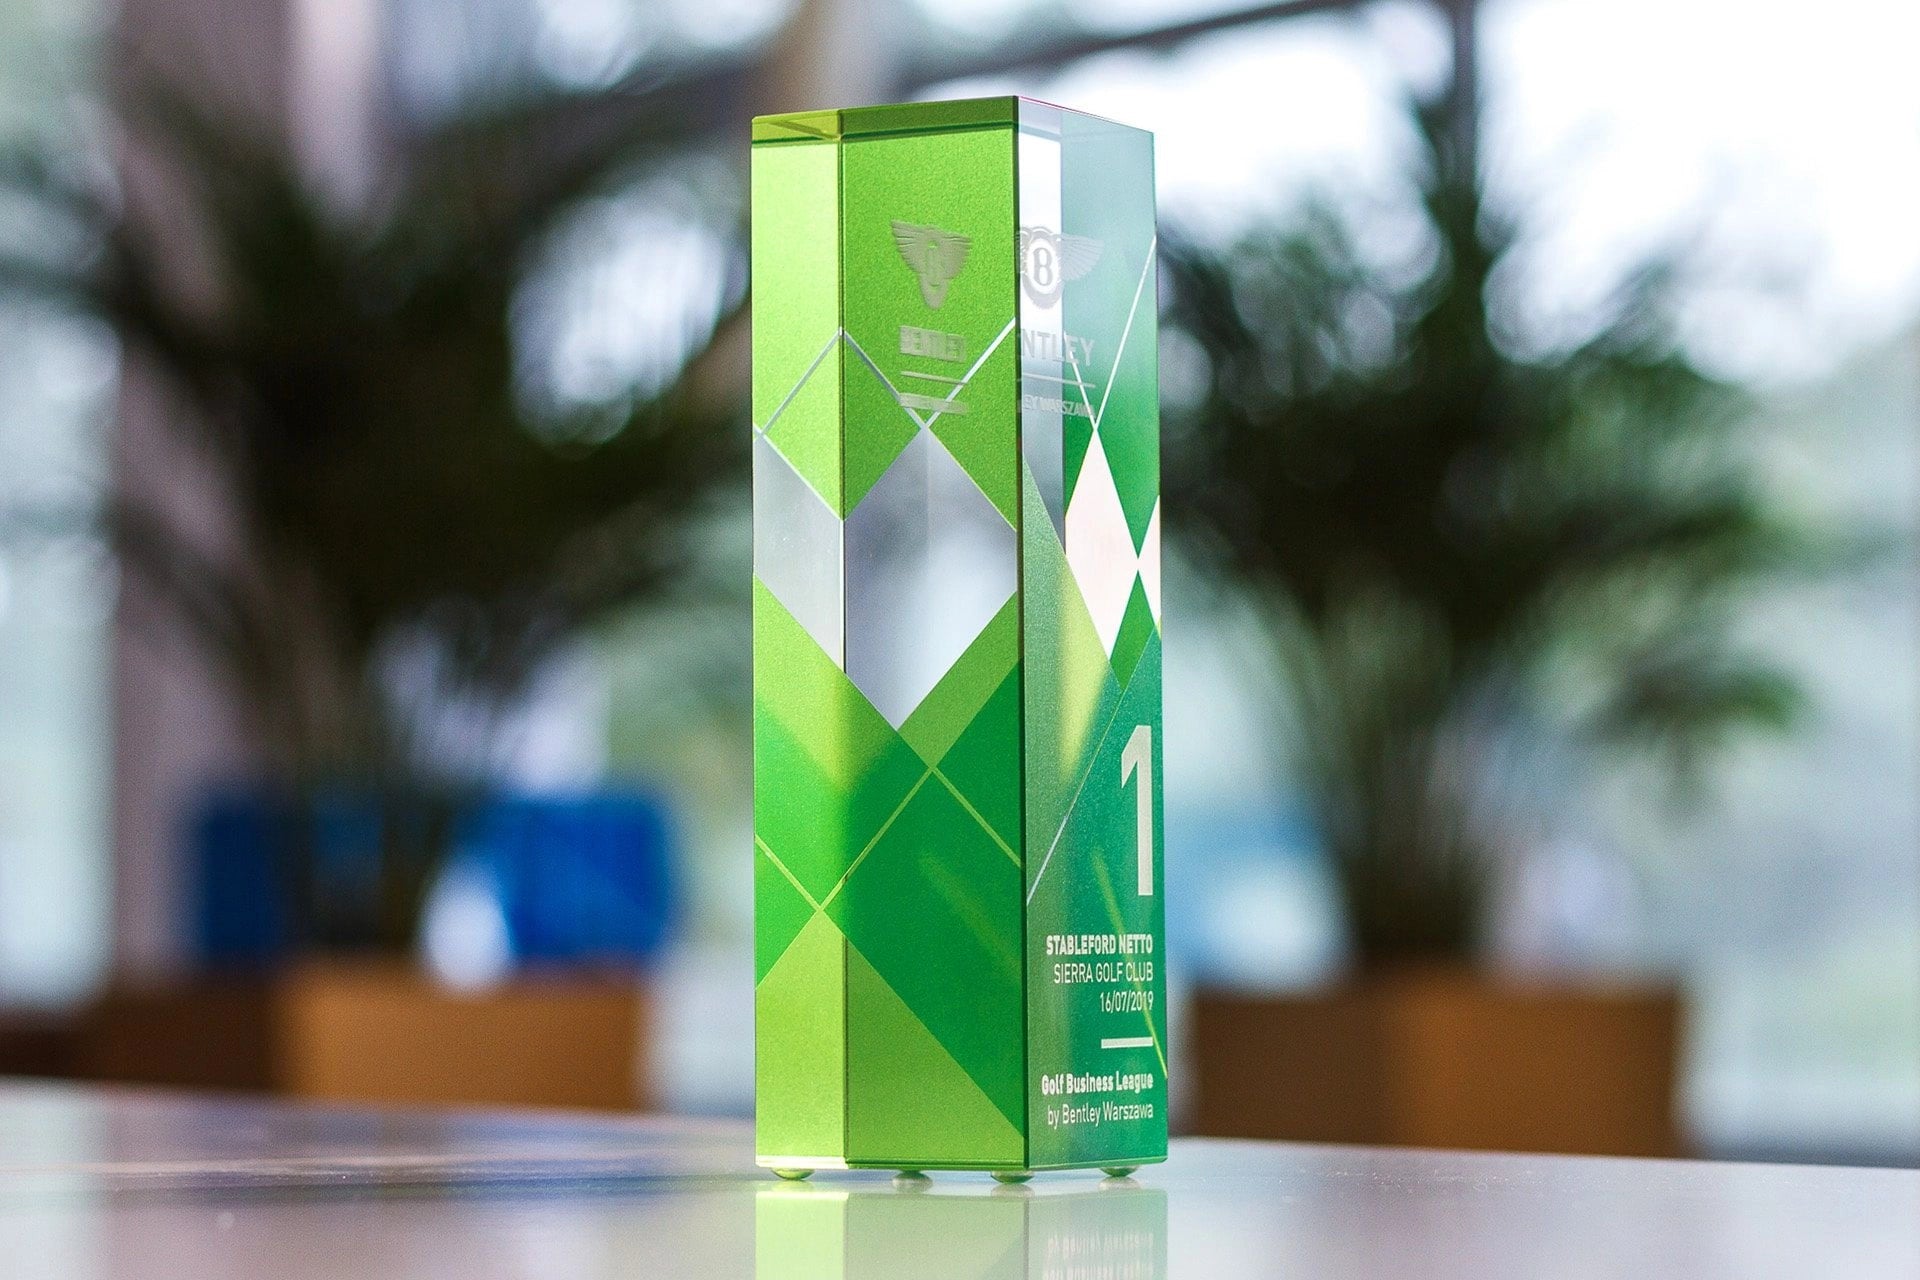 Crystal Tower Branded Green